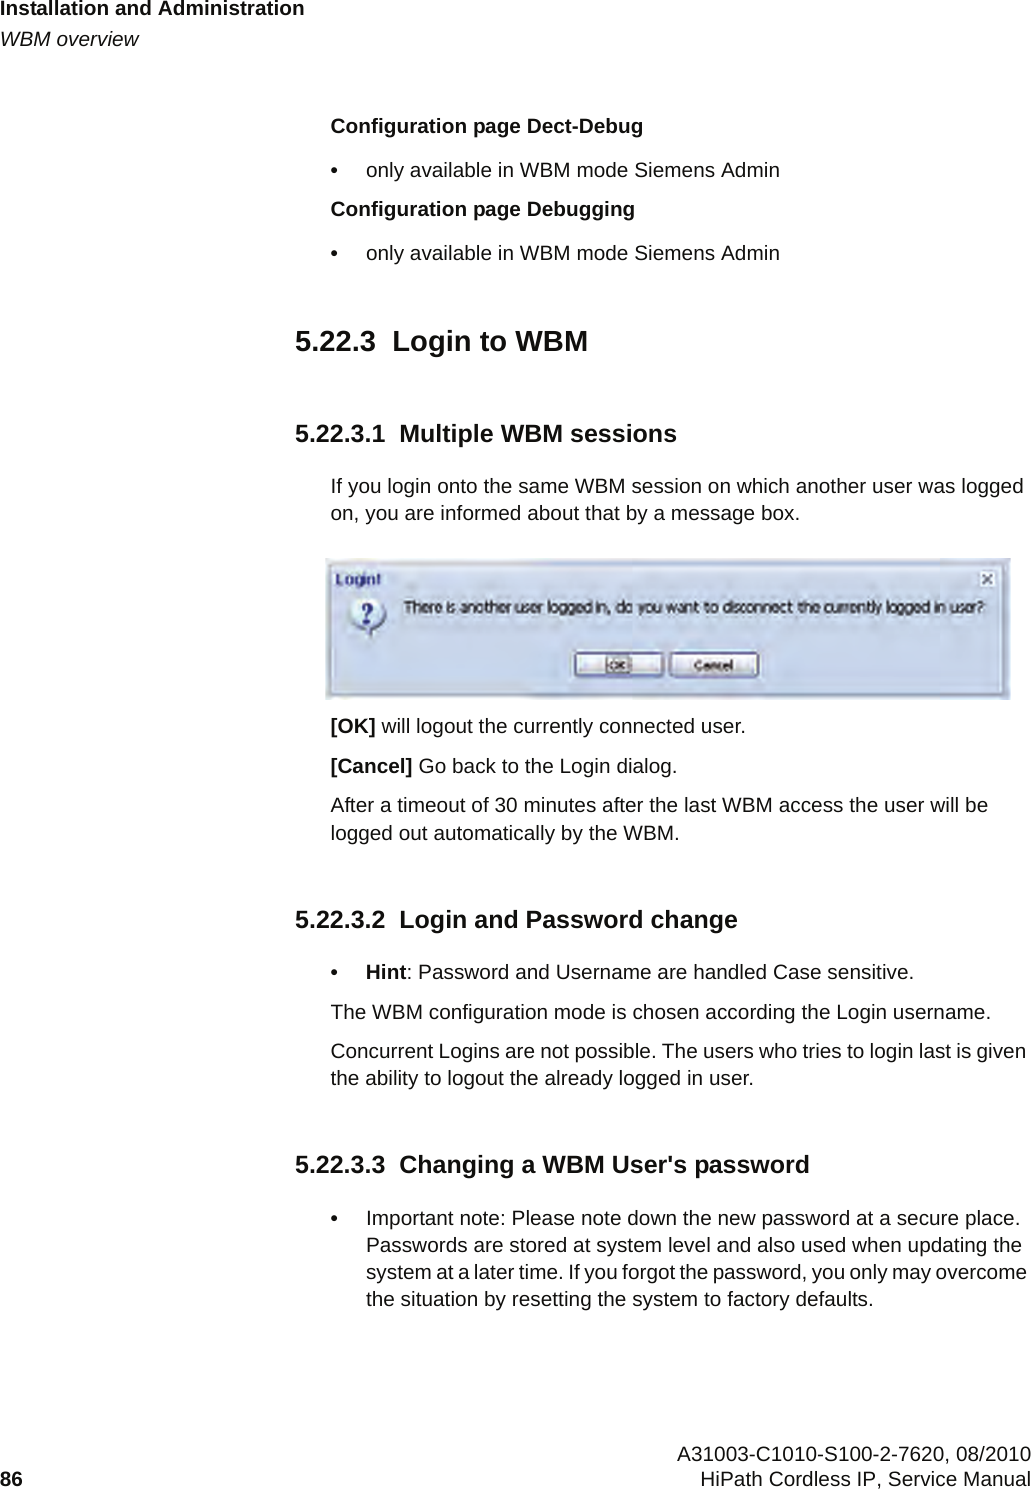 Installation and Administrationc05_ikon.fmWBM overview A31003-C1010-S100-2-7620, 08/201086 HiPath Cordless IP, Service Manual          Configuration page Dect-Debug•only available in WBM mode Siemens AdminConfiguration page Debugging•only available in WBM mode Siemens Admin5.22.3  Login to WBM5.22.3.1  Multiple WBM sessionsIf you login onto the same WBM session on which another user was logged on, you are informed about that by a message box.  [OK] will logout the currently connected user.[Cancel] Go back to the Login dialog.After a timeout of 30 minutes after the last WBM access the user will be logged out automatically by the WBM.5.22.3.2  Login and Password change•Hint: Password and Username are handled Case sensitive.The WBM configuration mode is chosen according the Login username.Concurrent Logins are not possible. The users who tries to login last is given the ability to logout the already logged in user.5.22.3.3  Changing a WBM User&apos;s password•Important note: Please note down the new password at a secure place. Passwords are stored at system level and also used when updating the system at a later time. If you forgot the password, you only may overcome the situation by resetting the system to factory defaults.